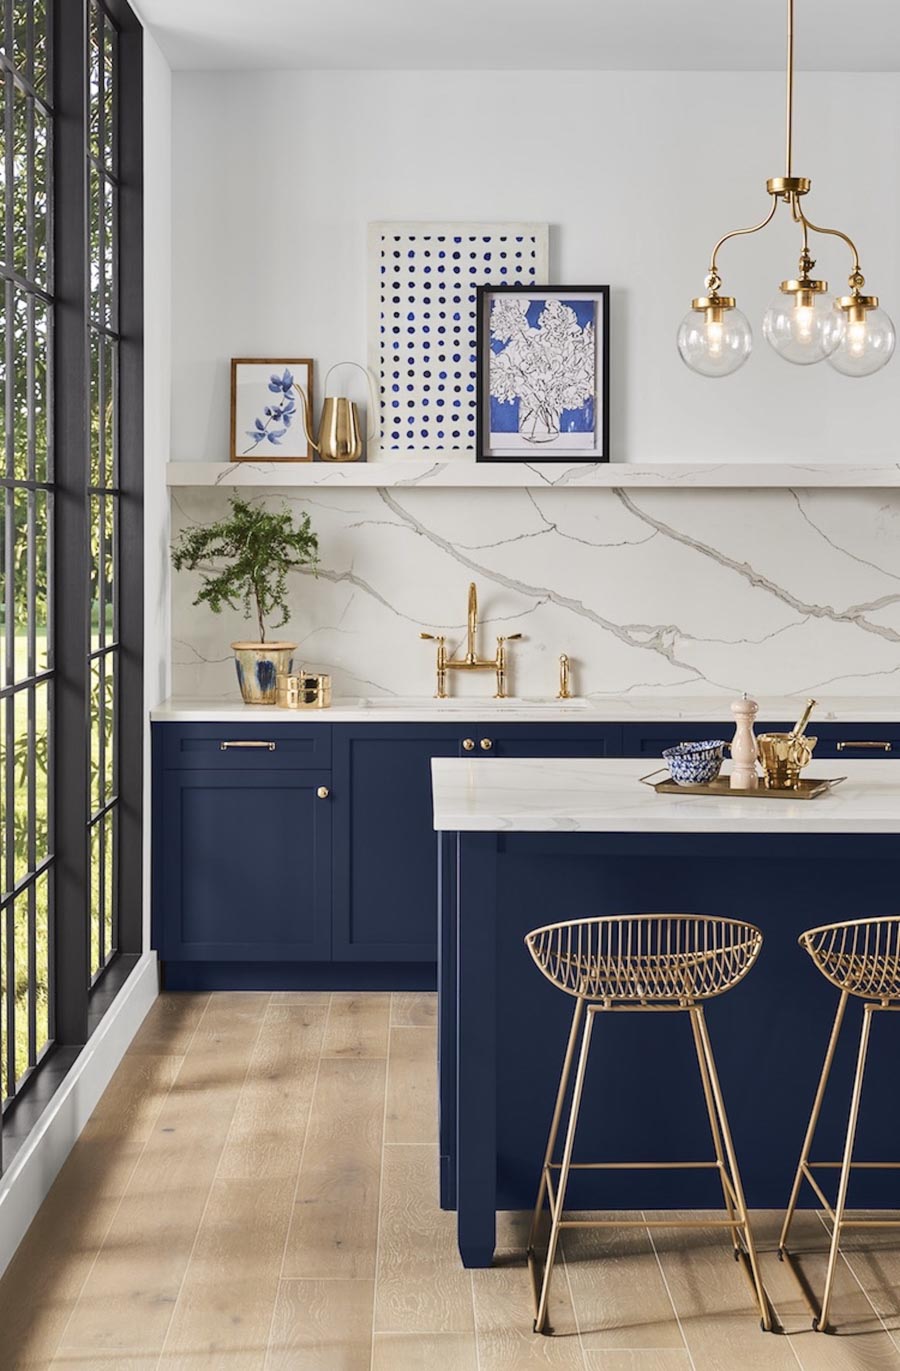 Love this kitchen cabinet color - deep blues are definitely a trending color!